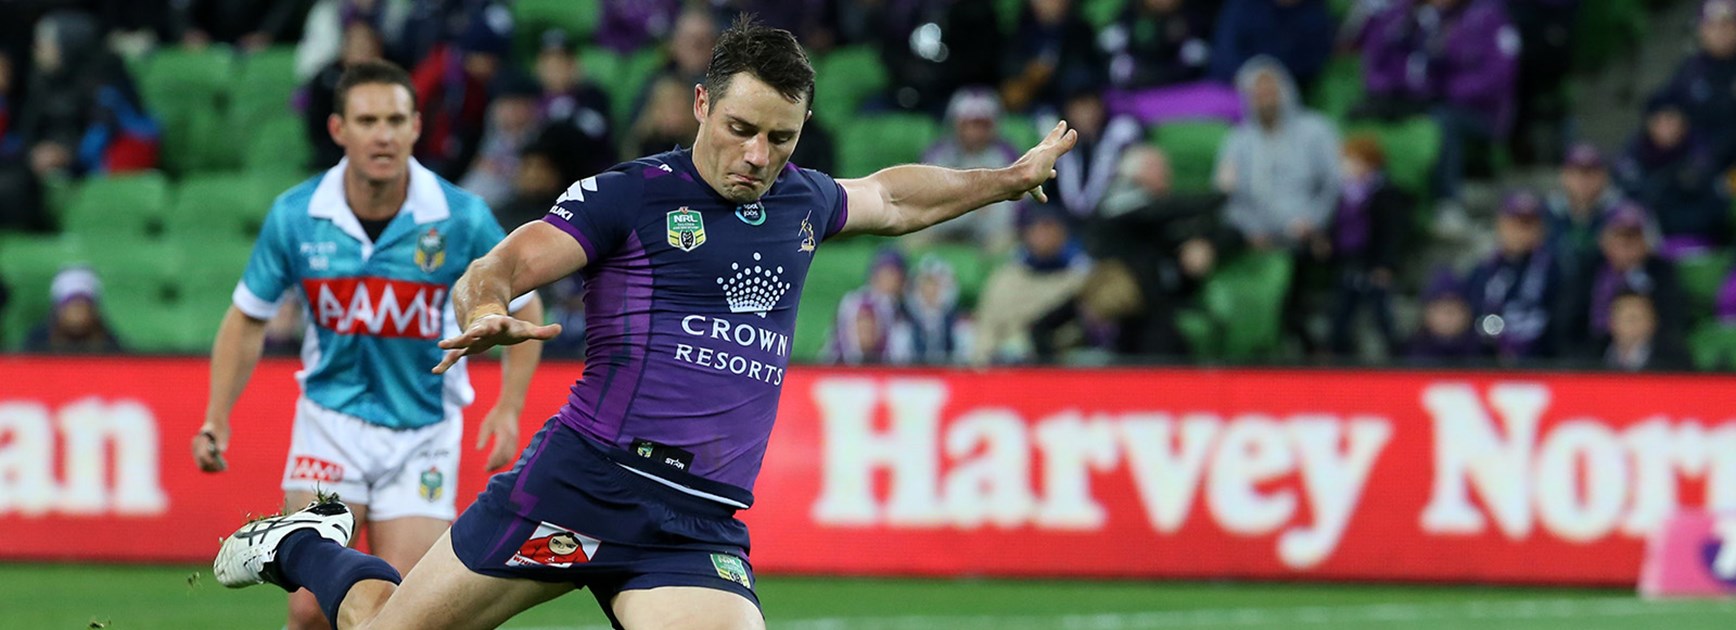 Cooper Cronk joined an elite group of players to reach 200 wins in the NRL.